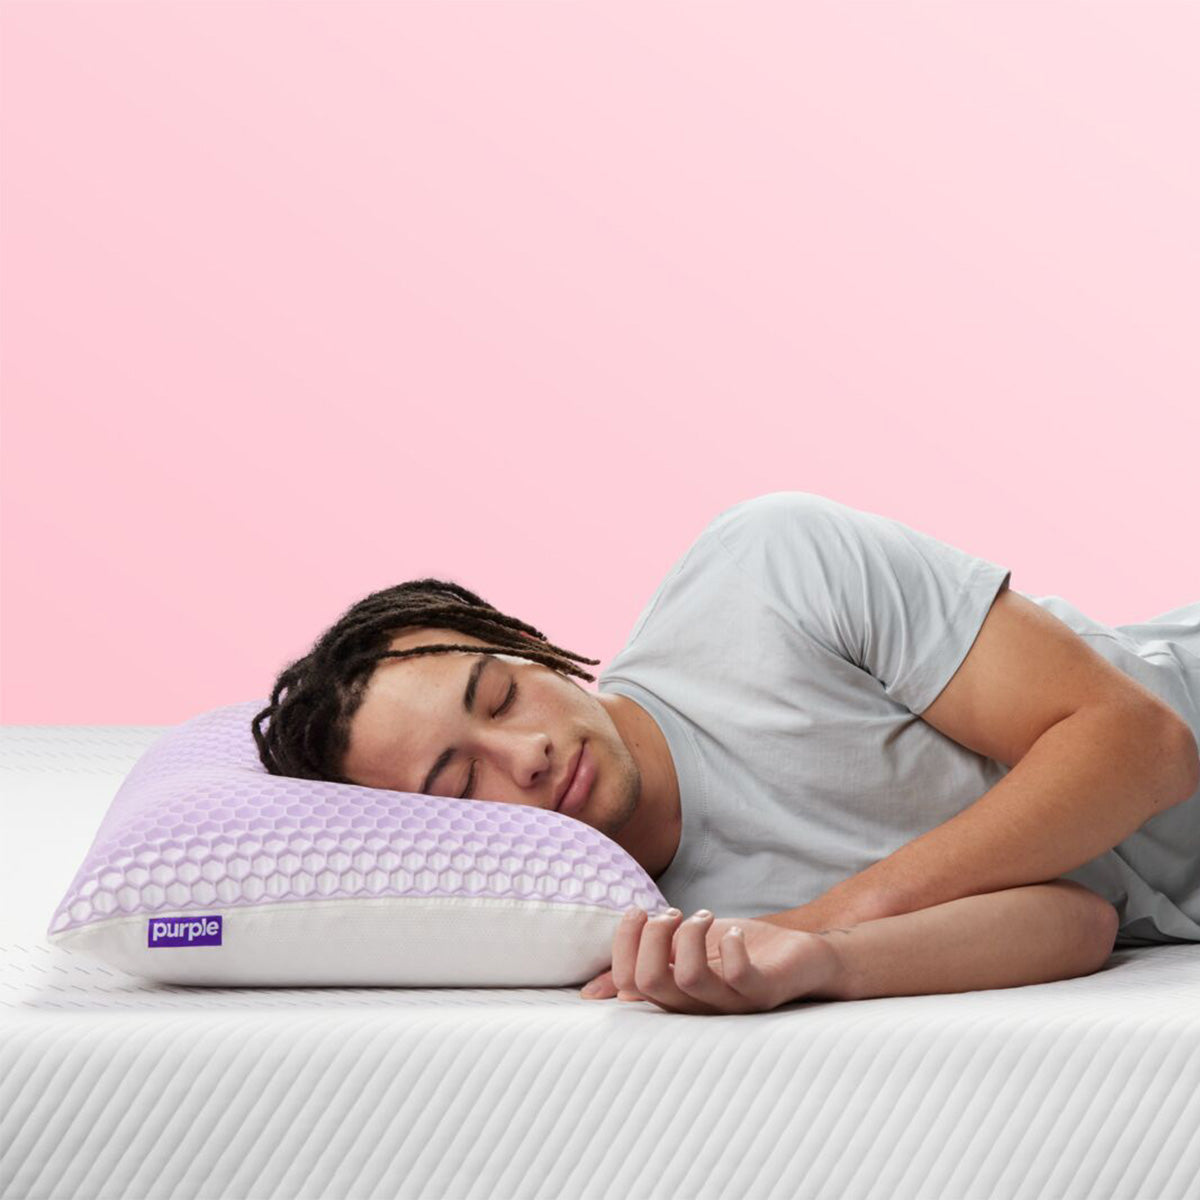 Man Sleeping On Purple Harmony Pillow Uncovered To Show The GelFlex Grid